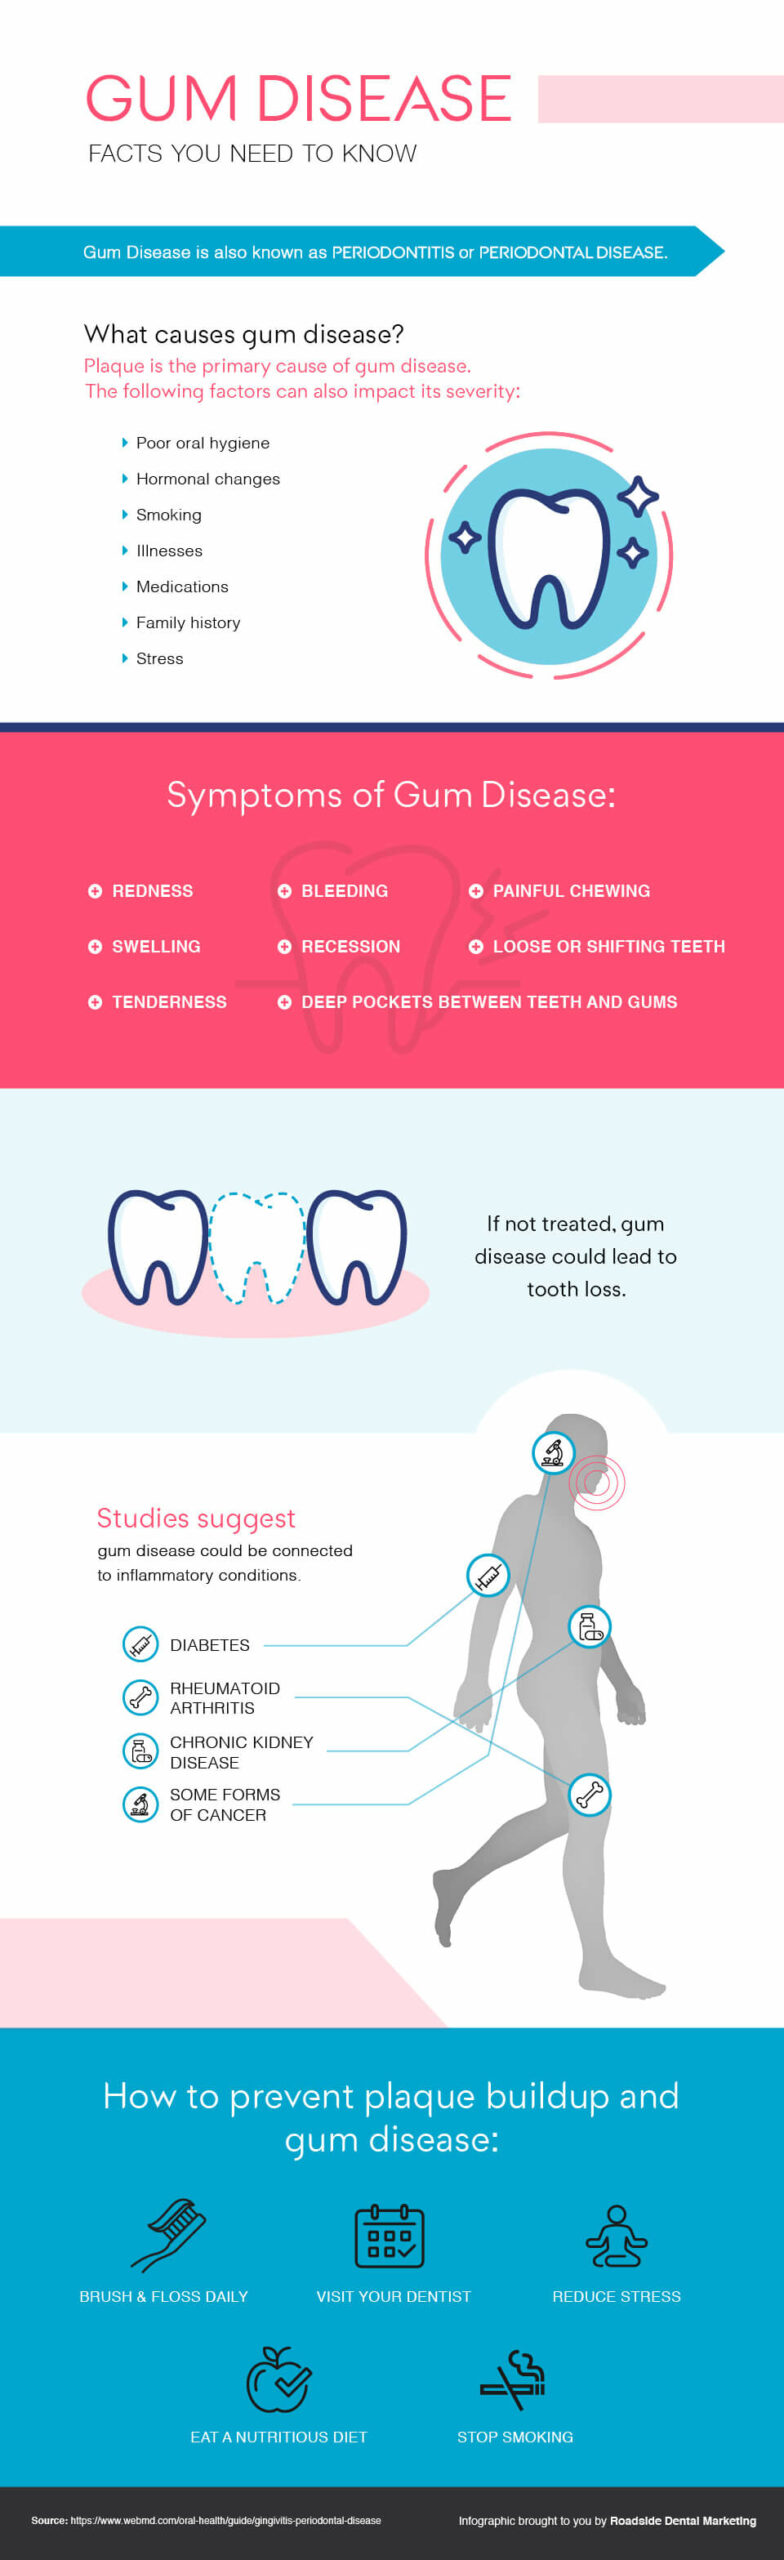 Infographic showing symptoms and causes of gum disease